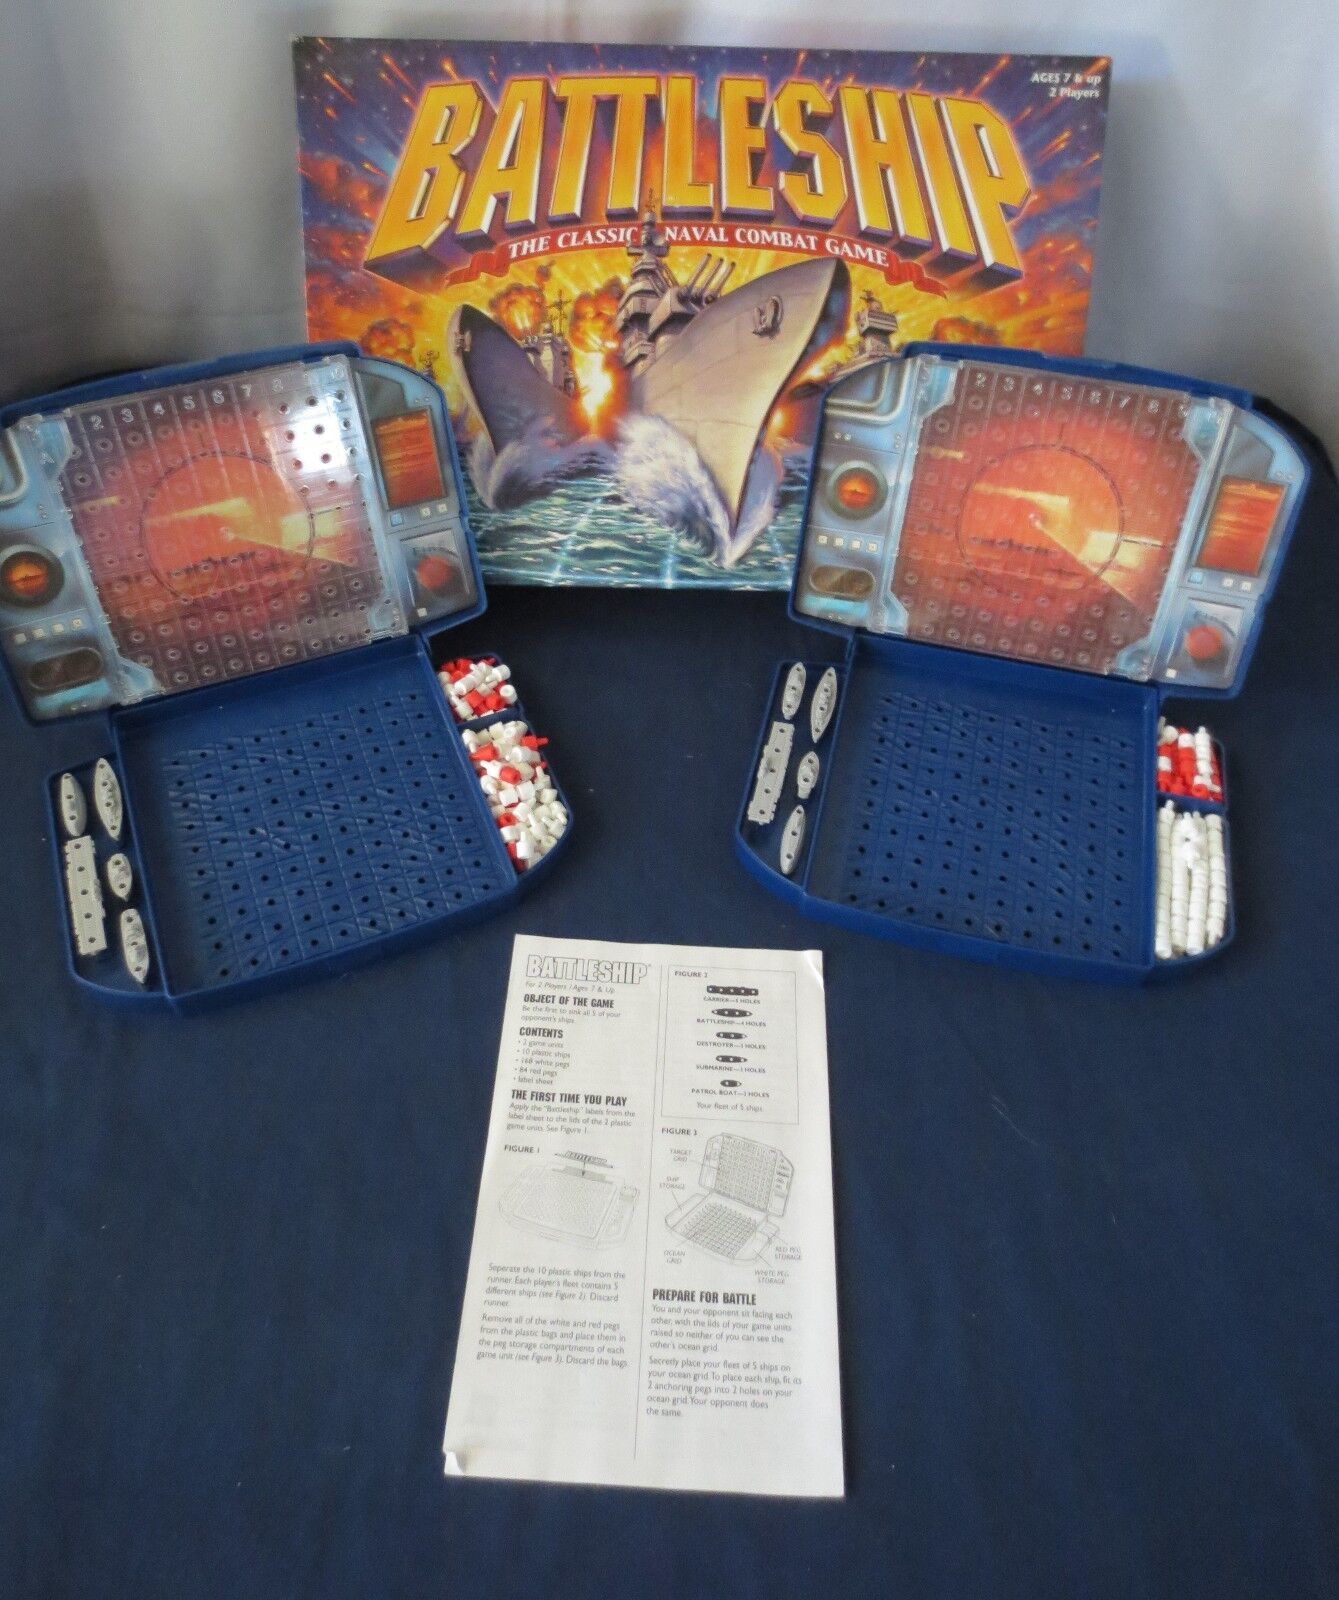 2002 BATTLESHIP Board Game: The Classic Naval Combat Game Complete - $25.00